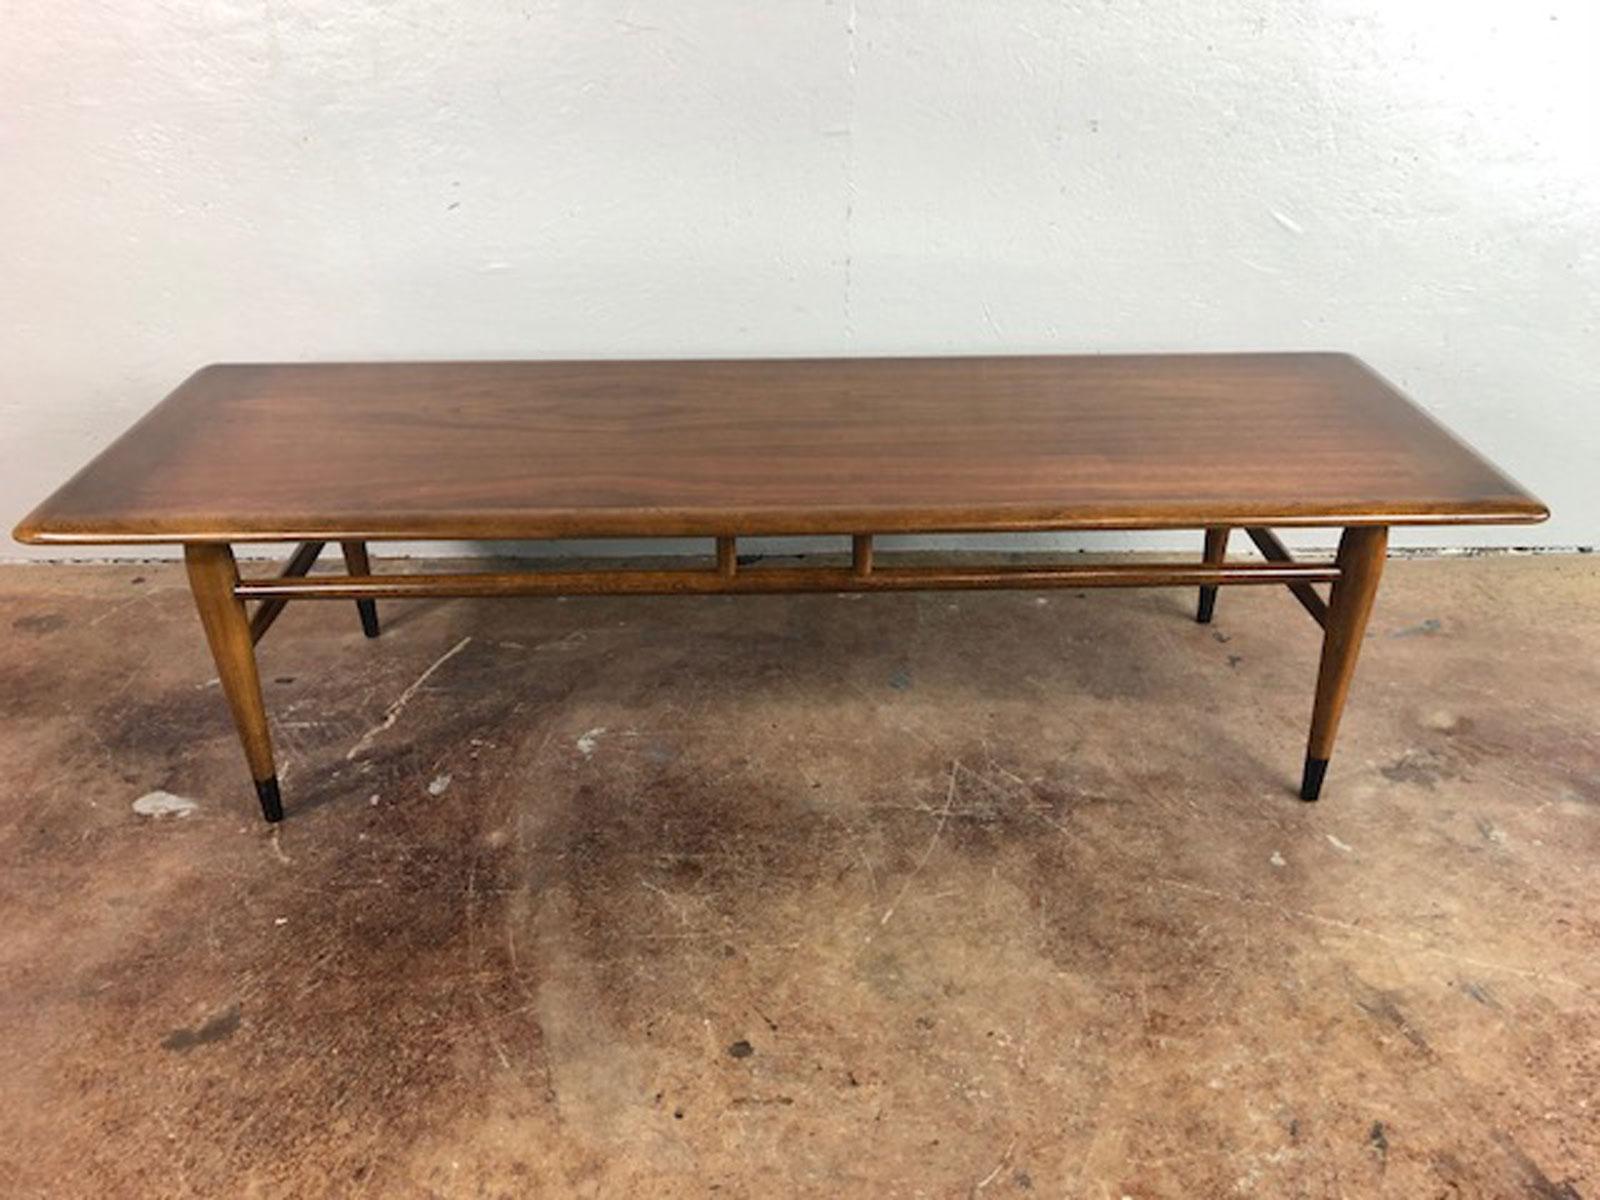 Mid-Century Modern coffee table by Lane in walnut and ash, circa 1960s. Original condition.